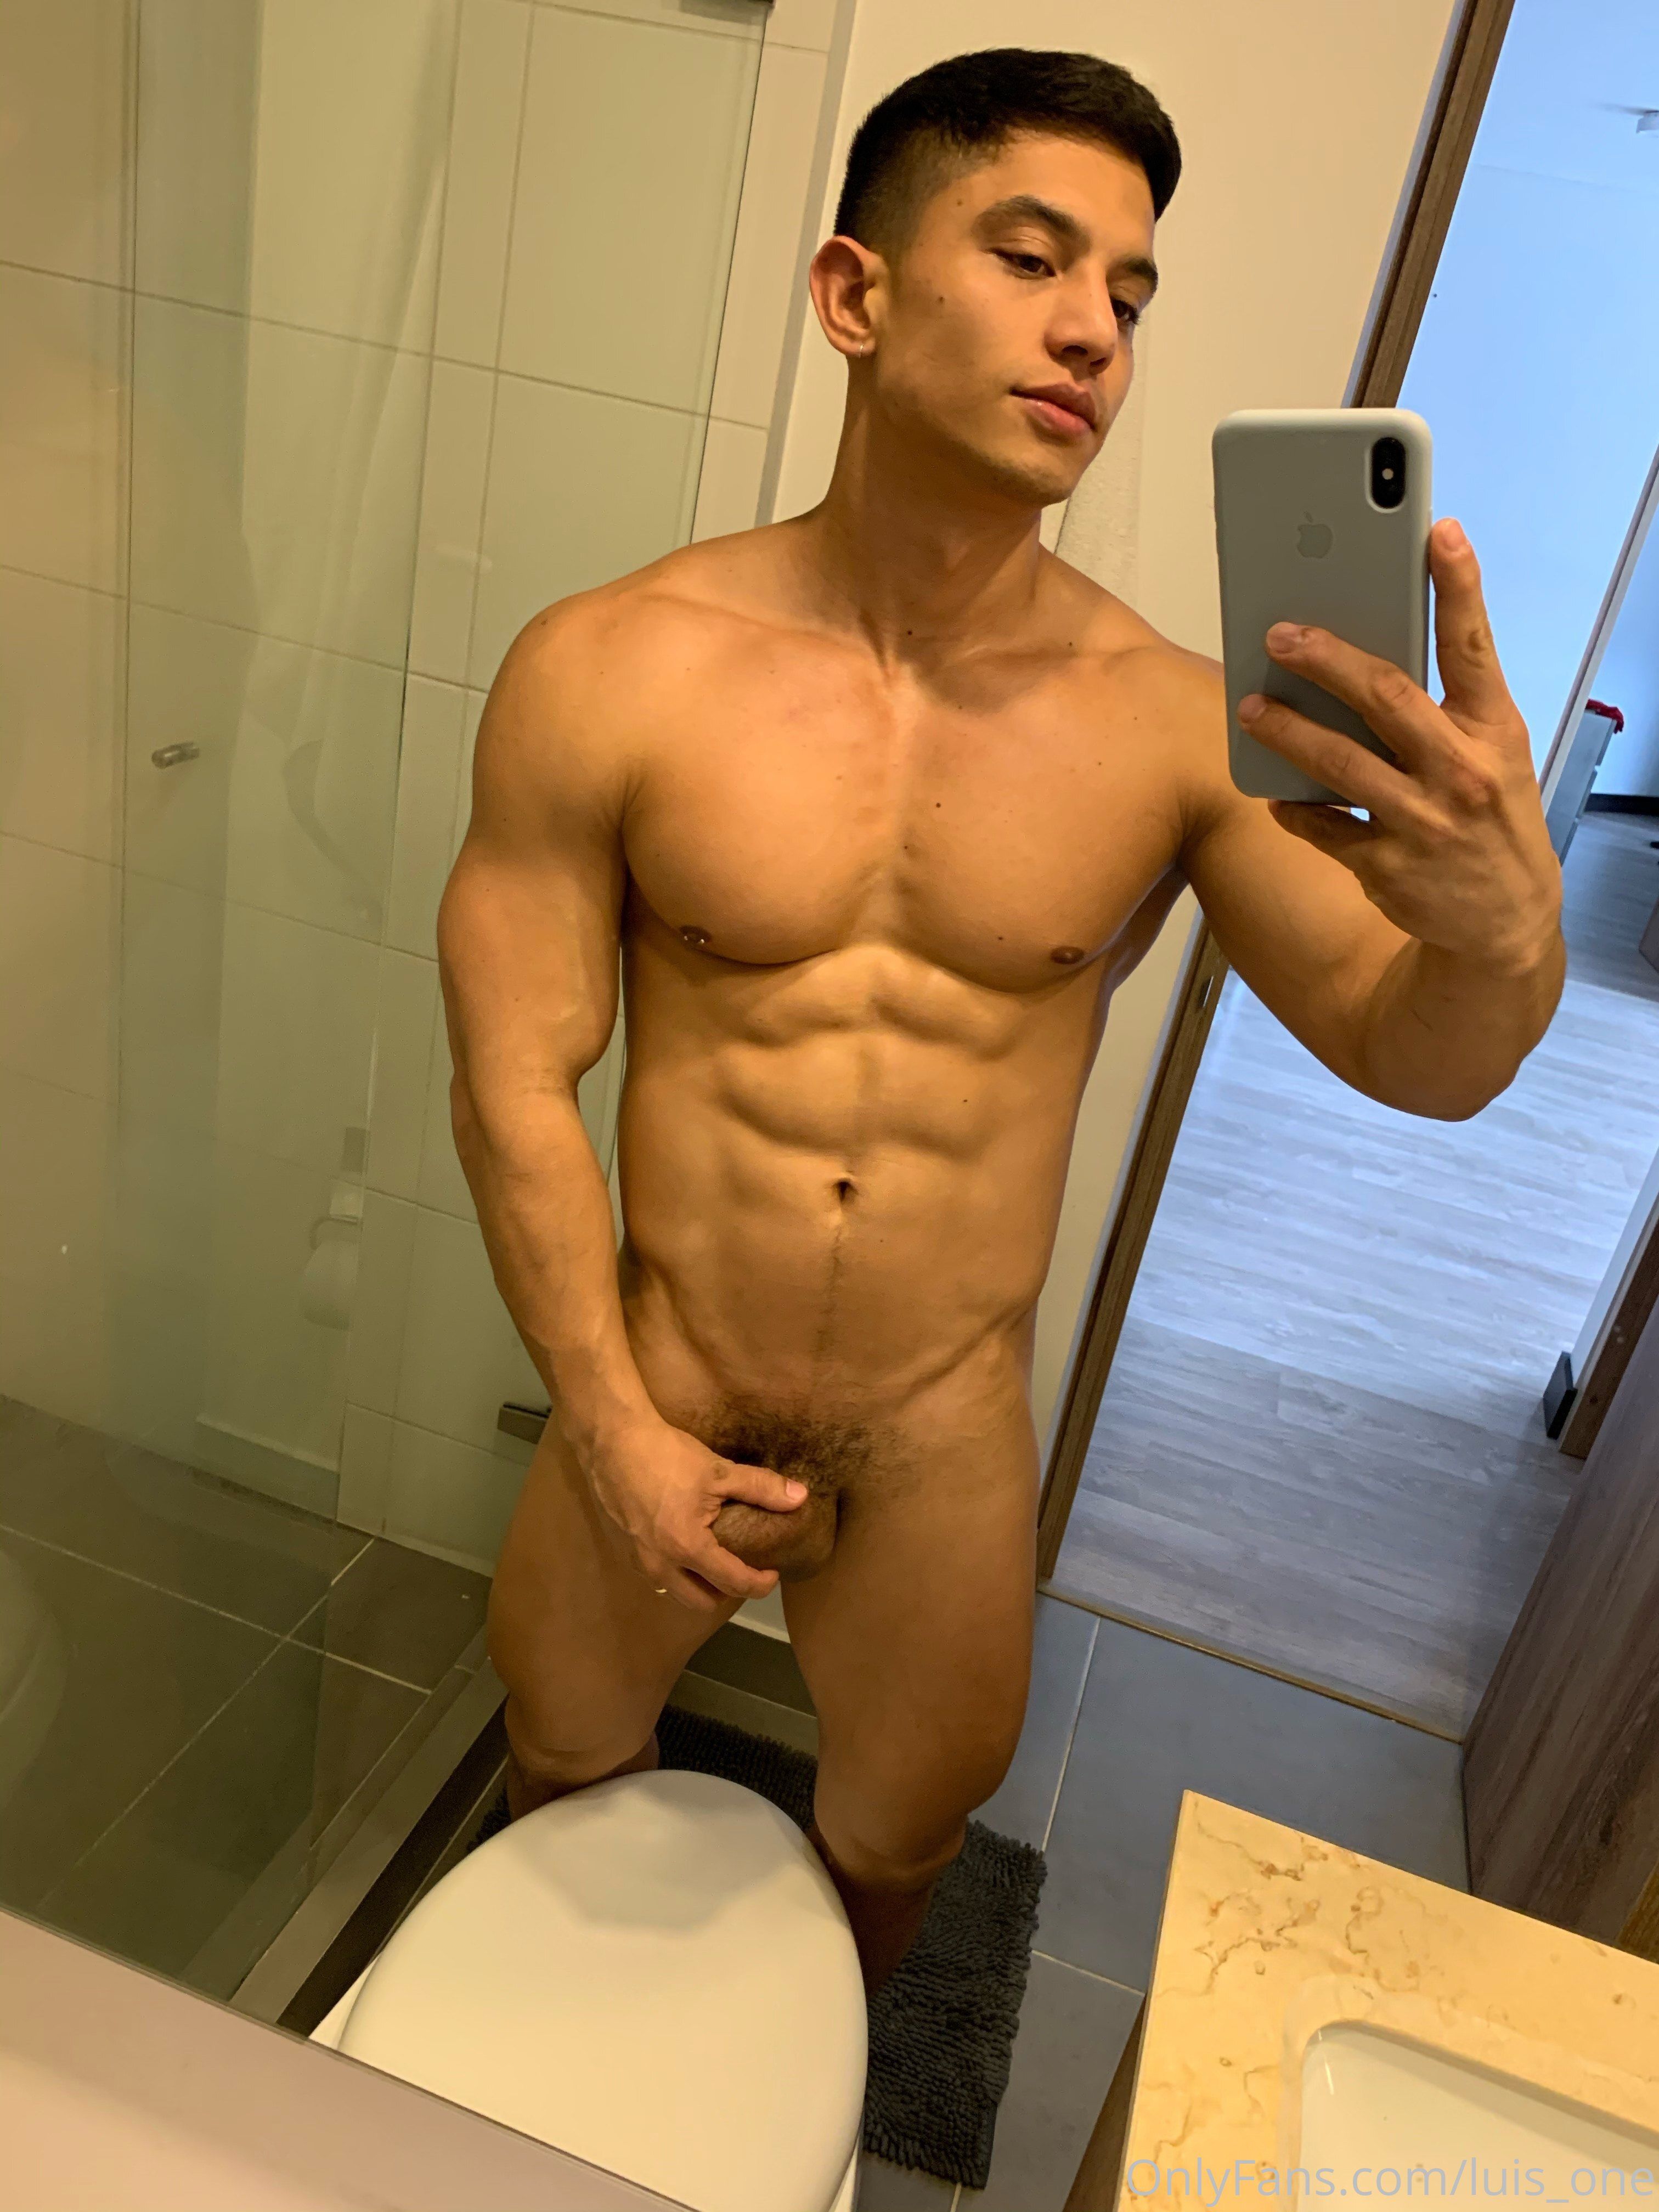 Luis @thiccboyluis nude pics